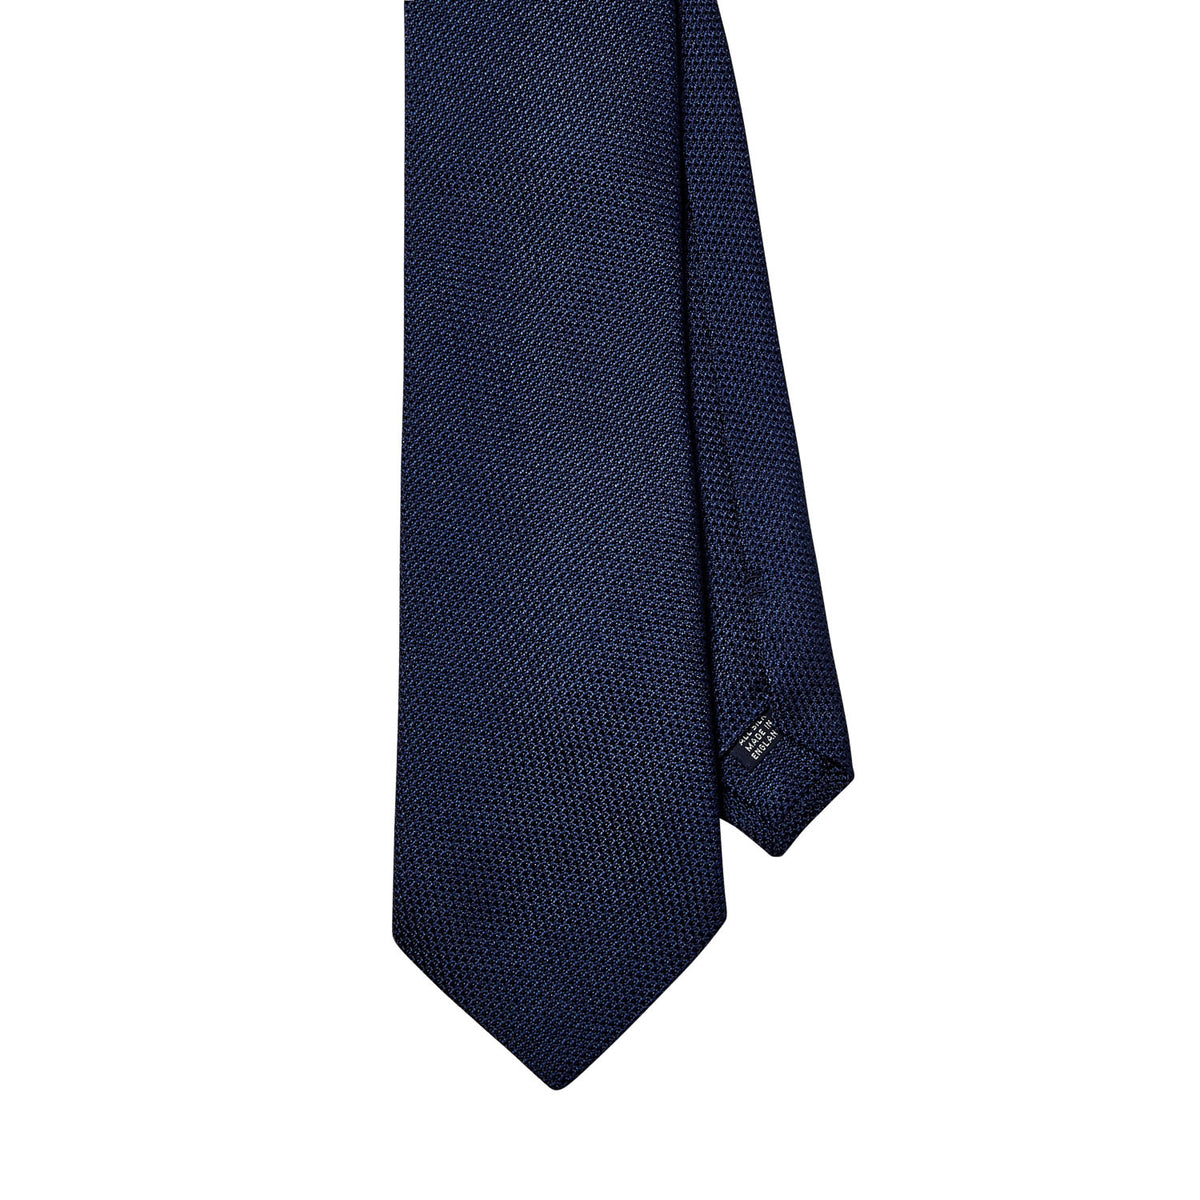 Handmade KirbyAllison.com Sovereign Grade Grenadine Fina Navy ties in various shades of blue on a white background, meticulously crafted in the United Kingdom.